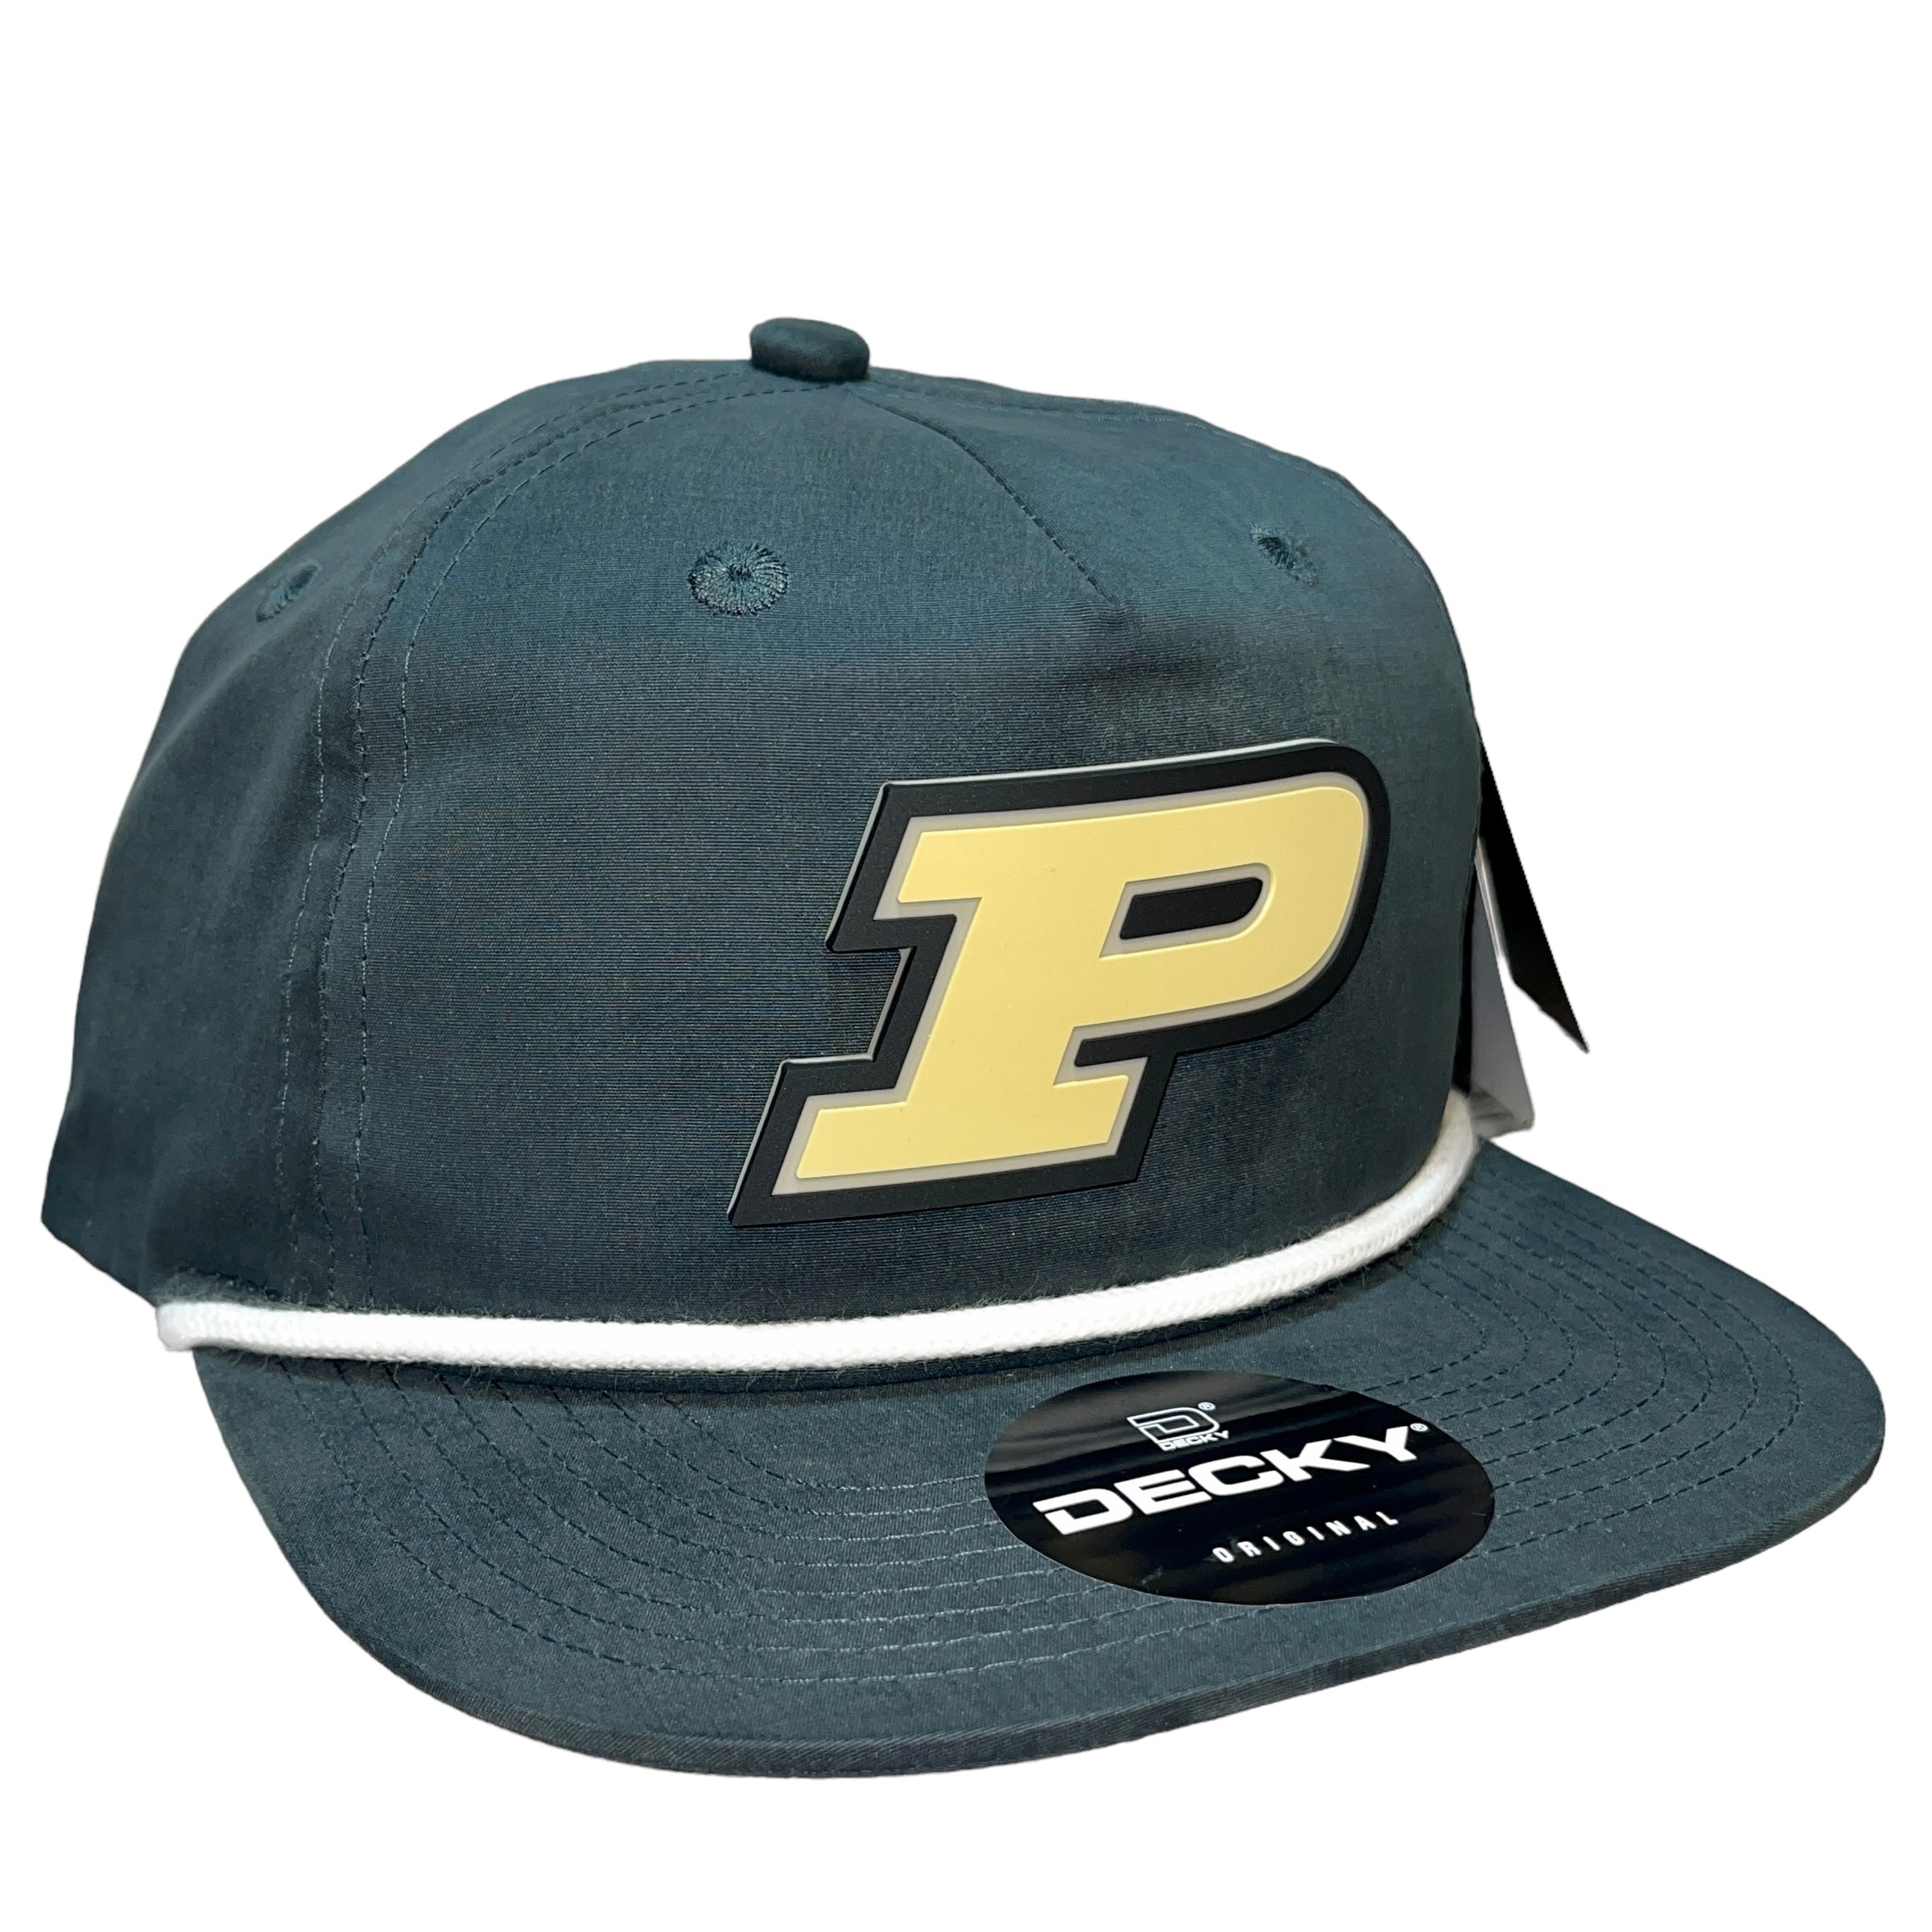 Purdue Boilermakers 3D Classic Rope Hat- Charcoal/ White